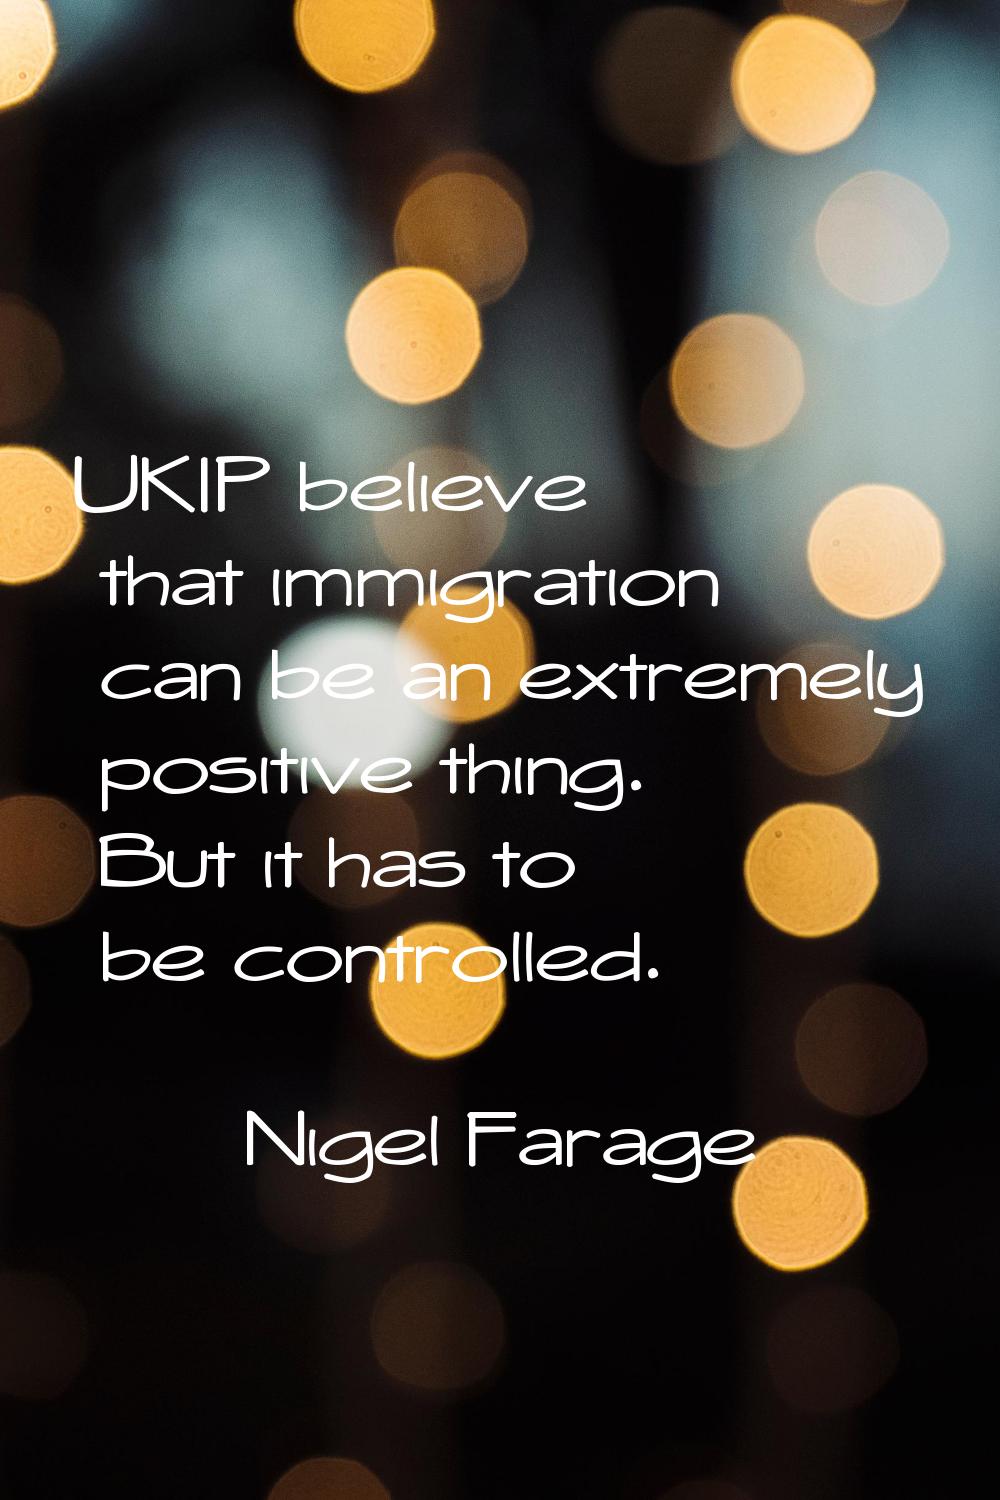 UKIP believe that immigration can be an extremely positive thing. But it has to be controlled.